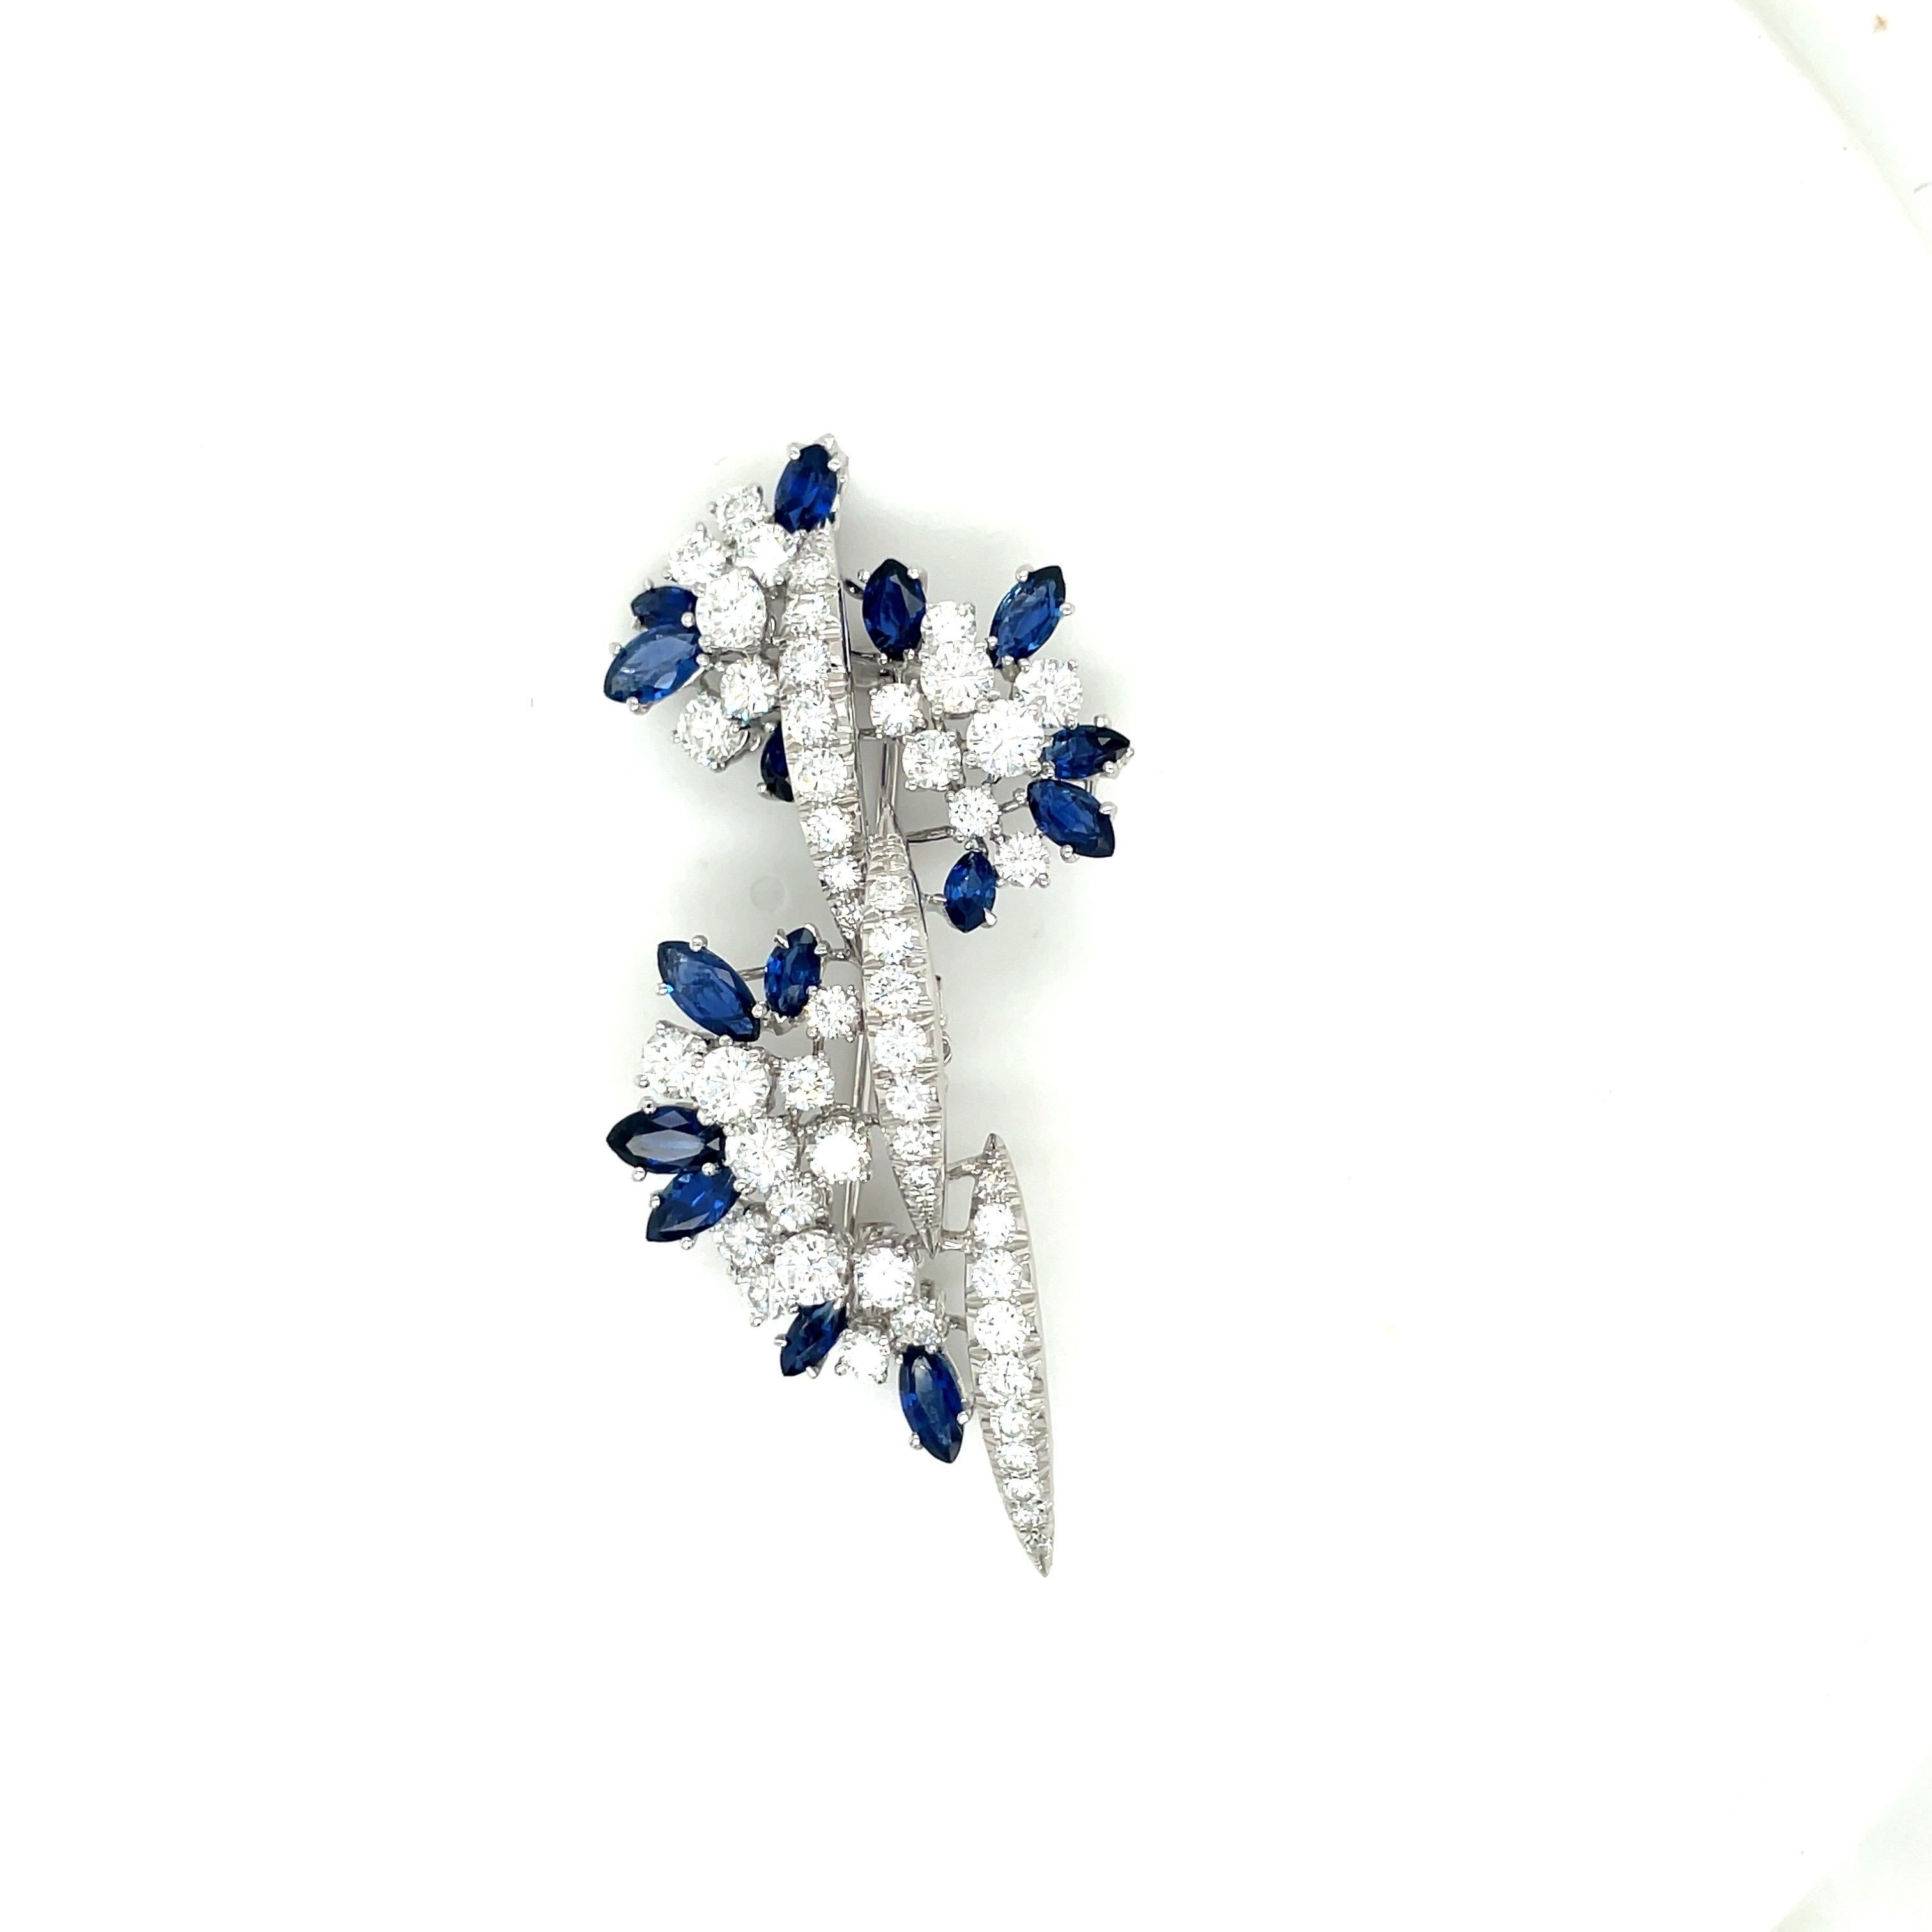 Beautiful 18 karat white gold classic brooch. This brooch is magnificently set with 50 round brilliant diamonds and 15 marquis blue sapphires. The 2.5